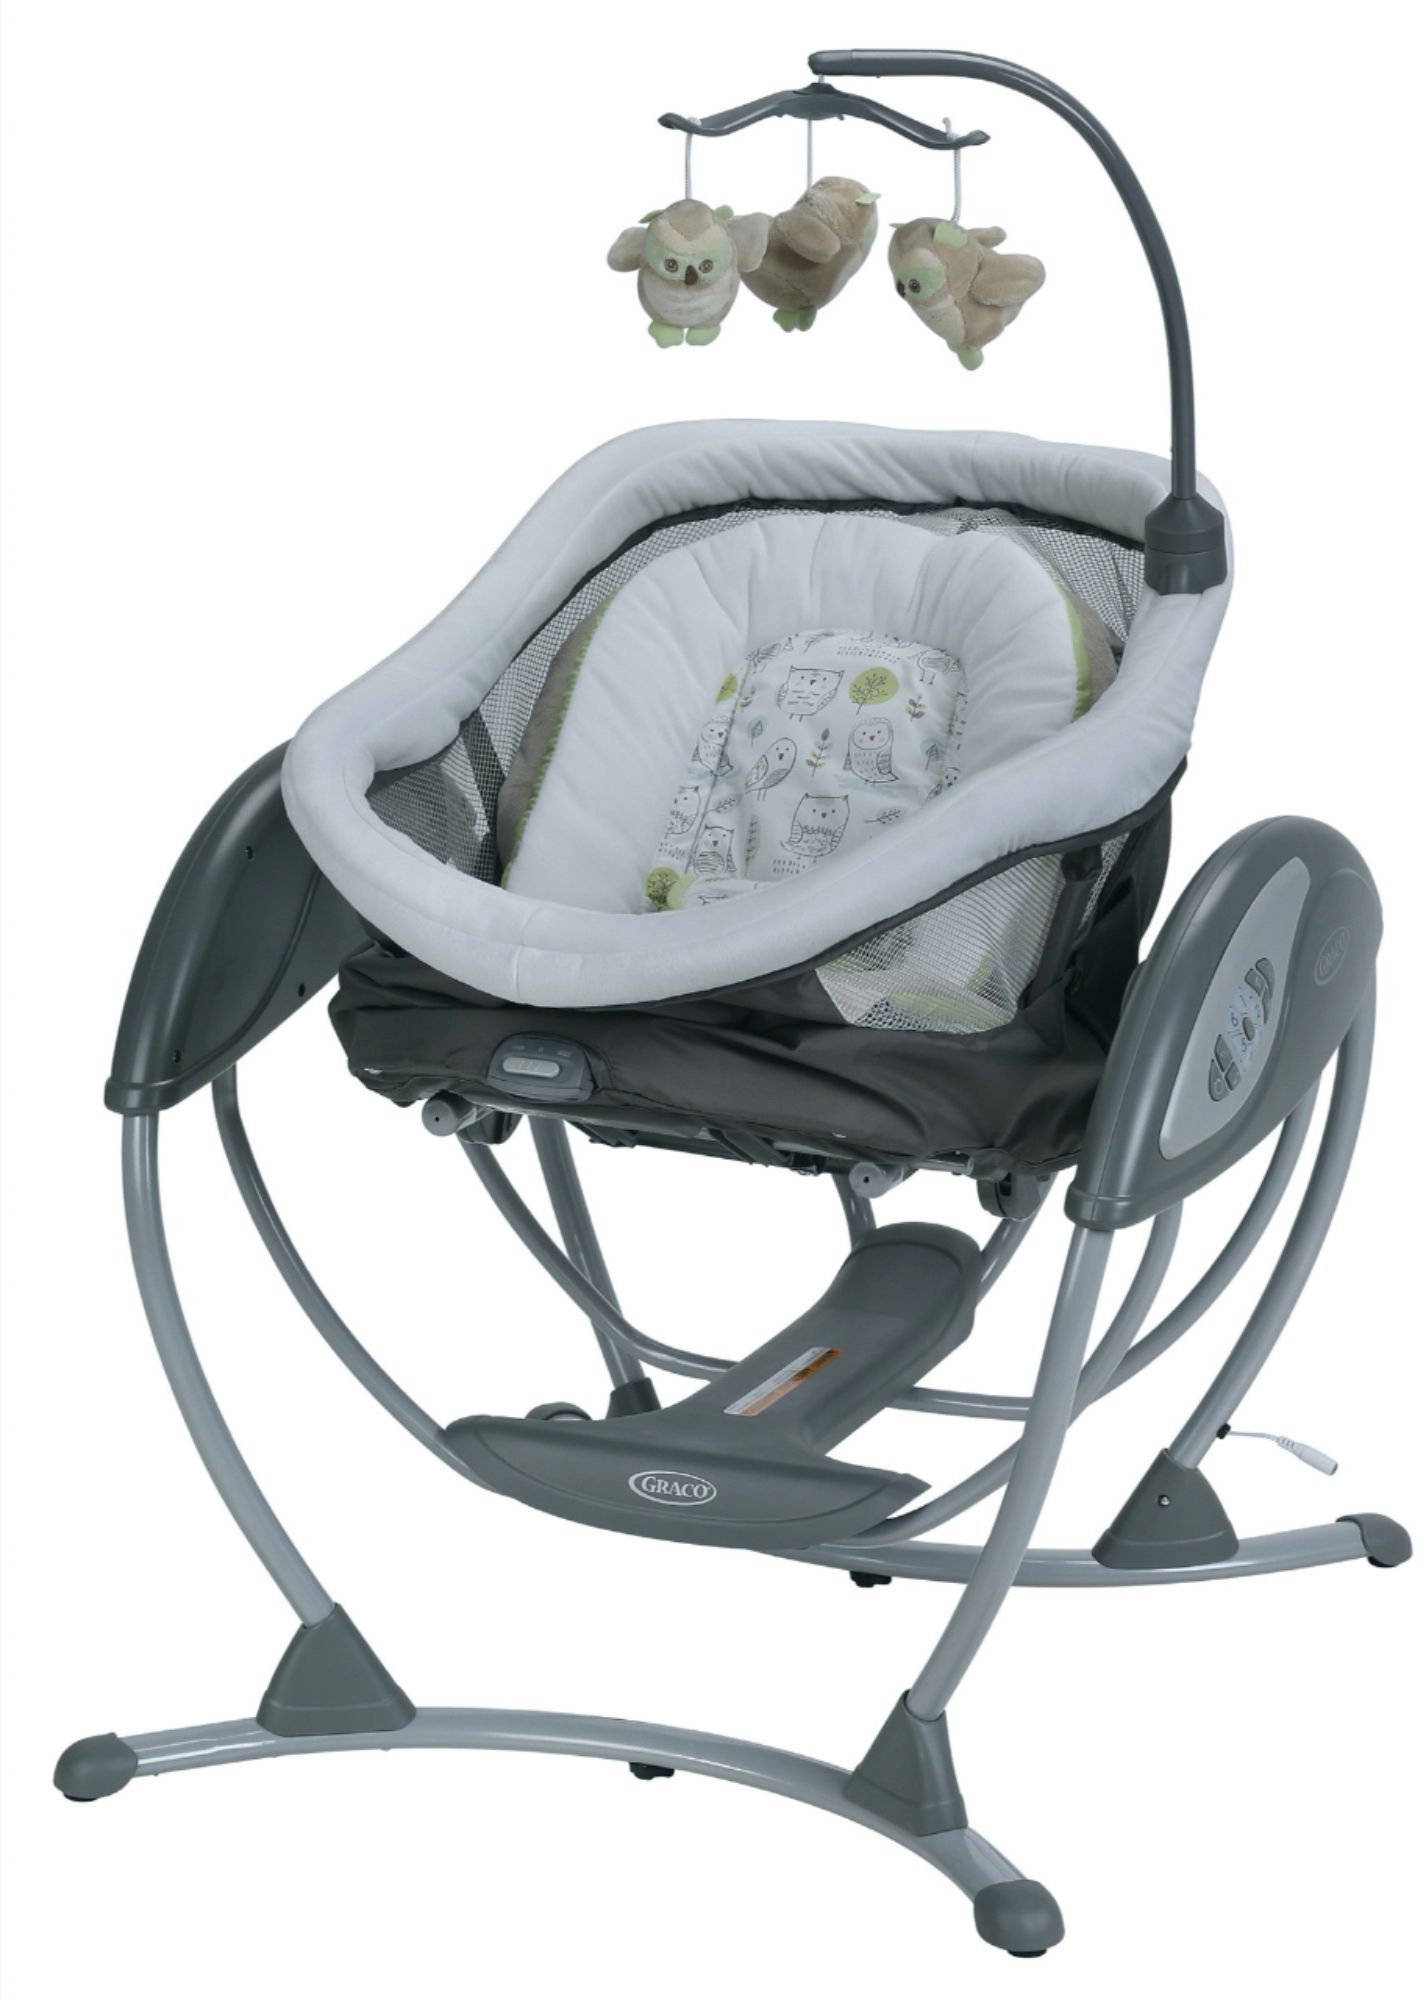 Angle View: Graco - DuoGlider® Swing - Percy